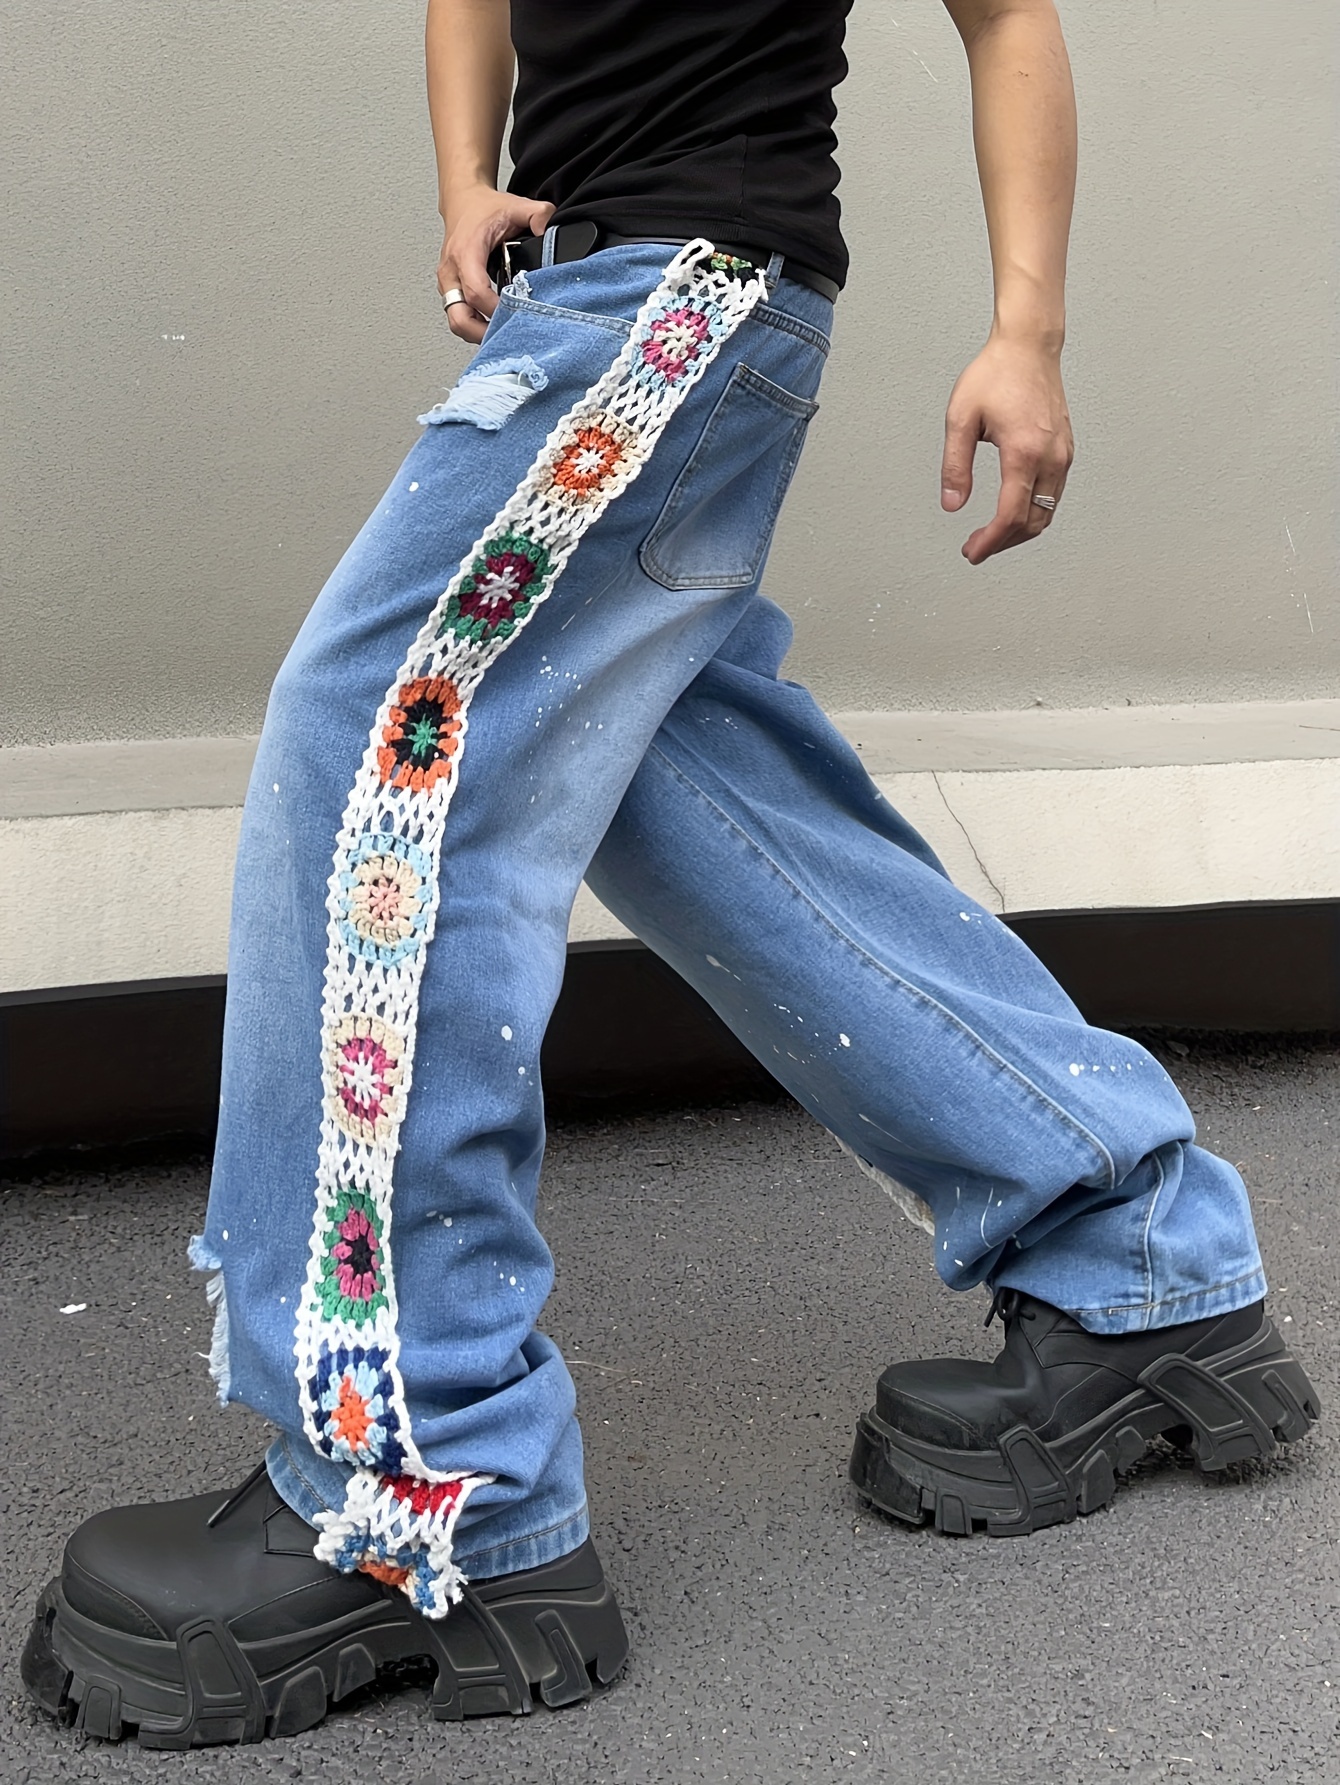 Letter Print Baggy Jeans Men's Casual Street Style Loose Fit